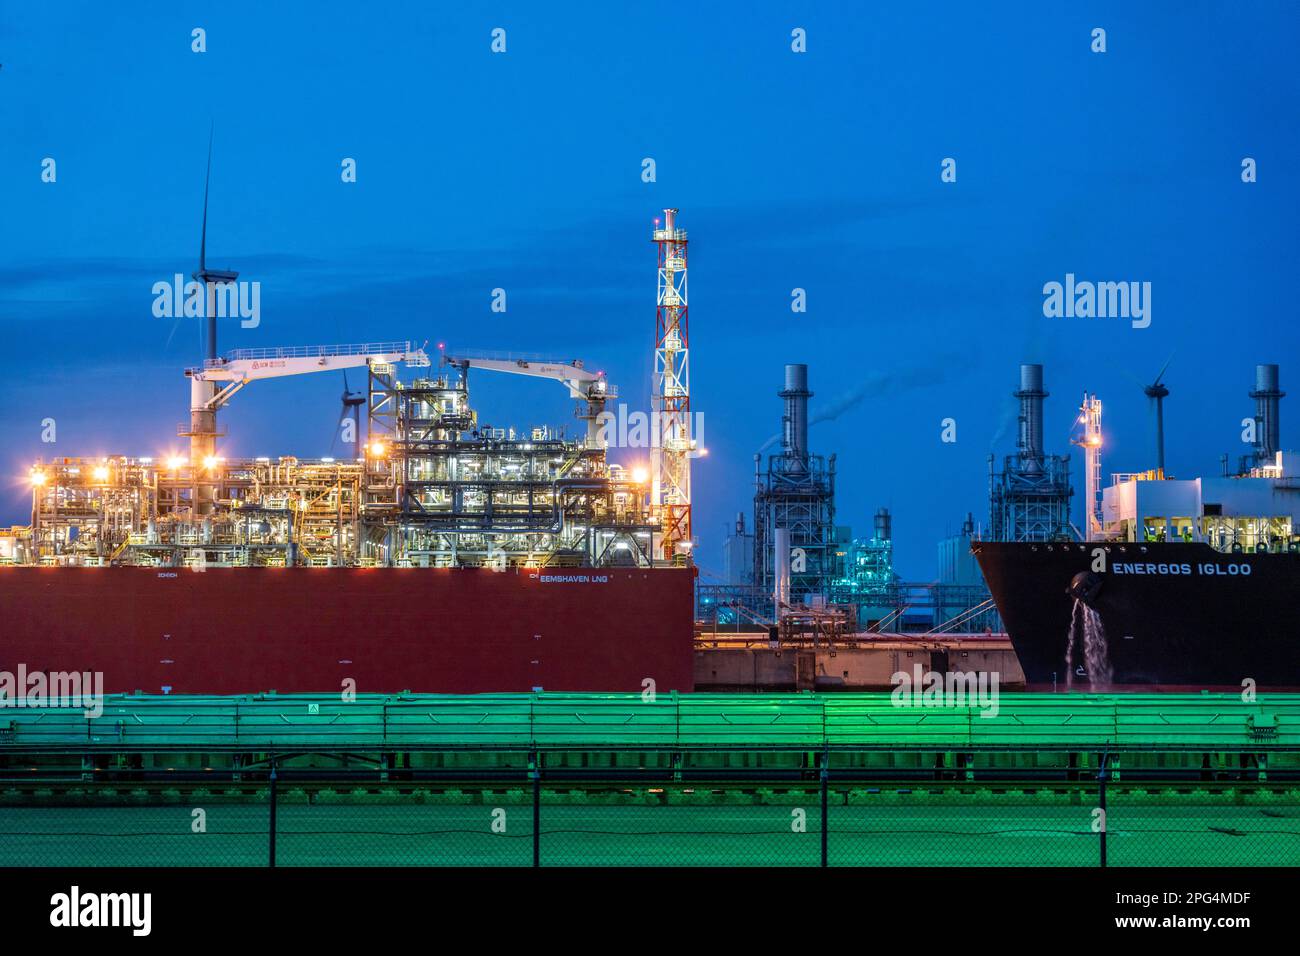 EemsEnergyTerminal, floating LNG terminal in the seaport of Eemshaven, tankers bring liquefied natural gas to the two production ships, Eemshaven LNG Stock Photo